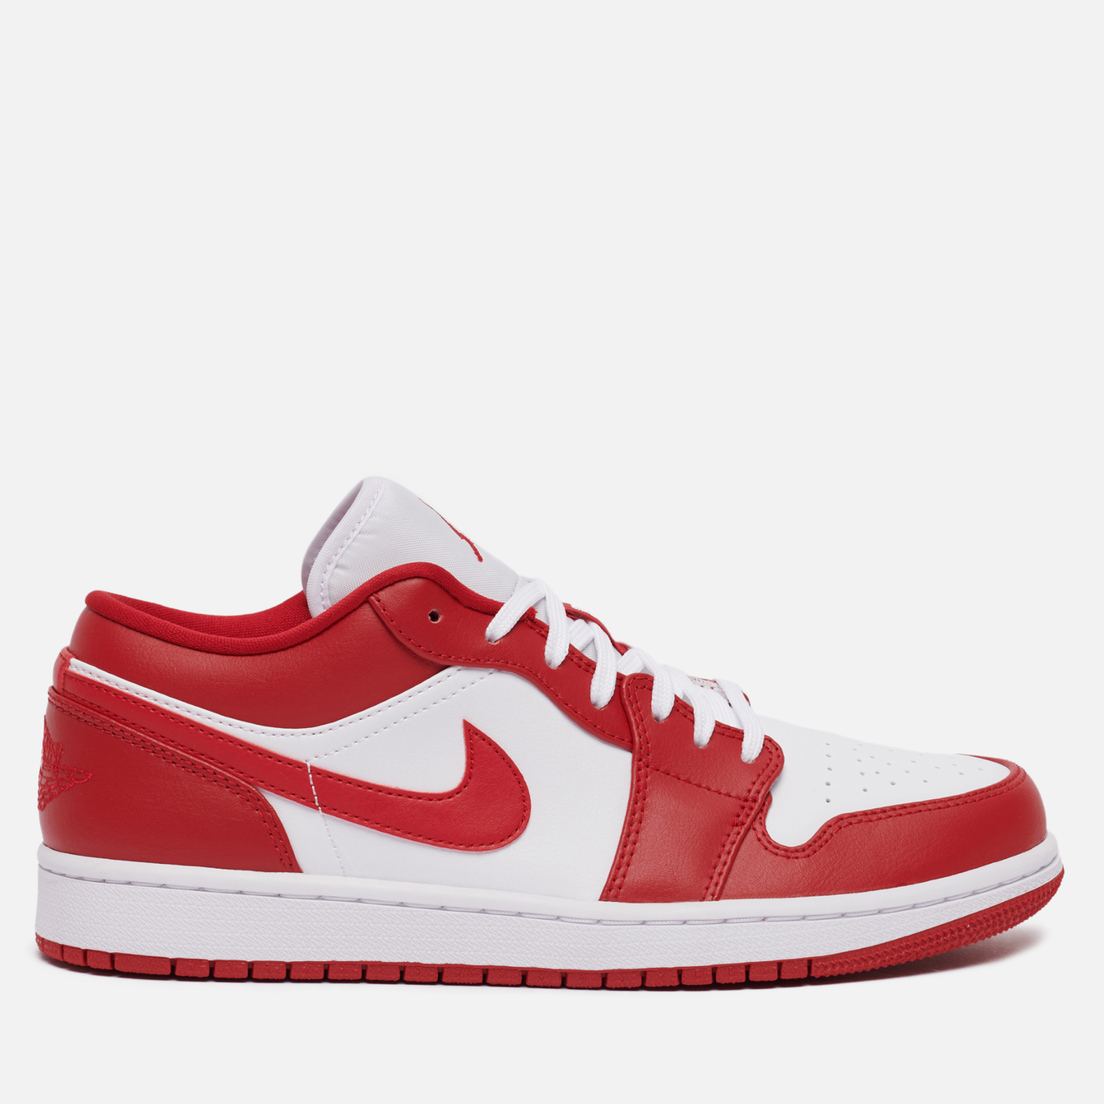 red and white aj1 low